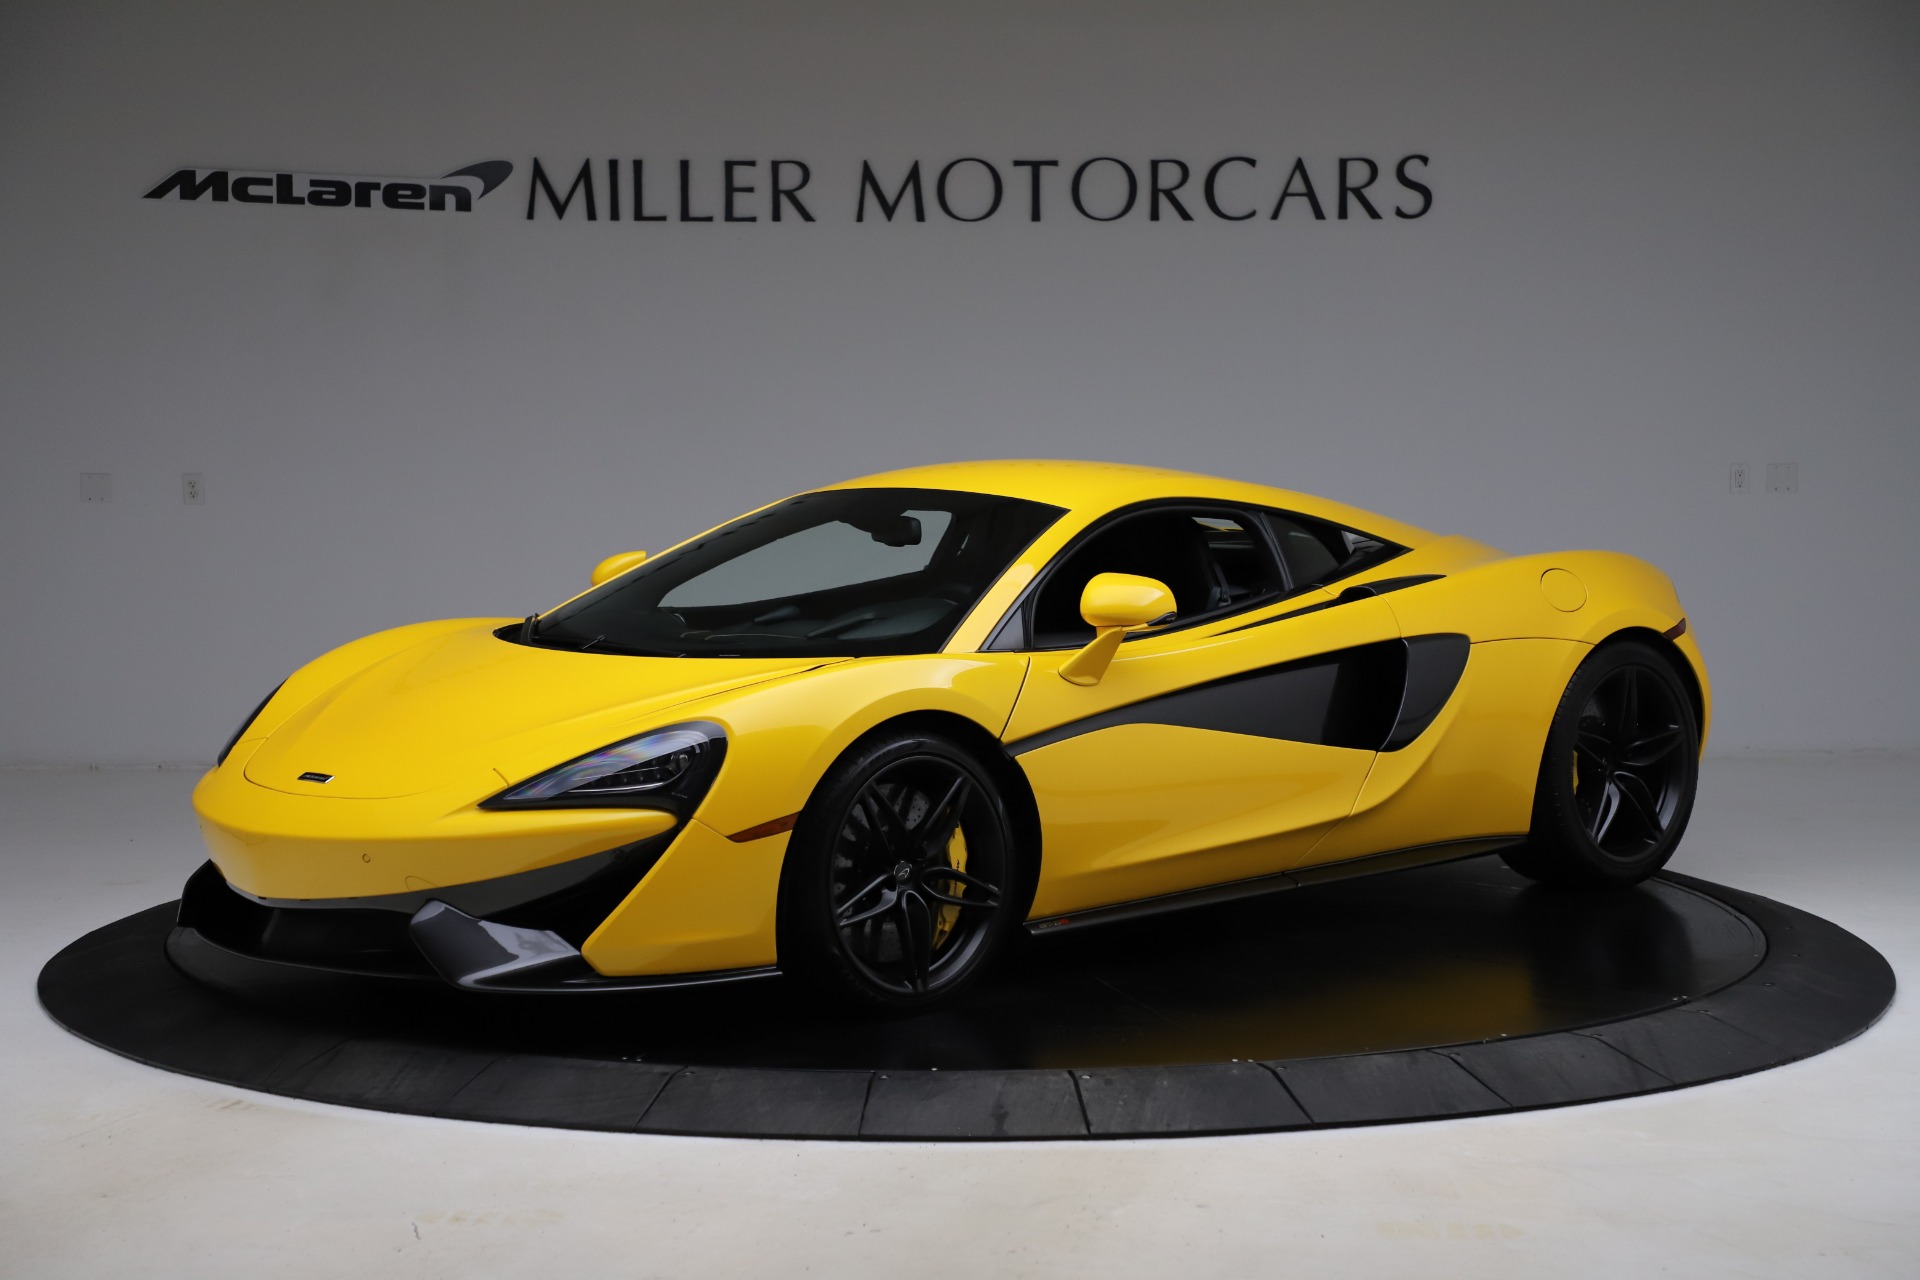 Used 2016 McLaren 570S for sale Sold at Maserati of Greenwich in Greenwich CT 06830 1